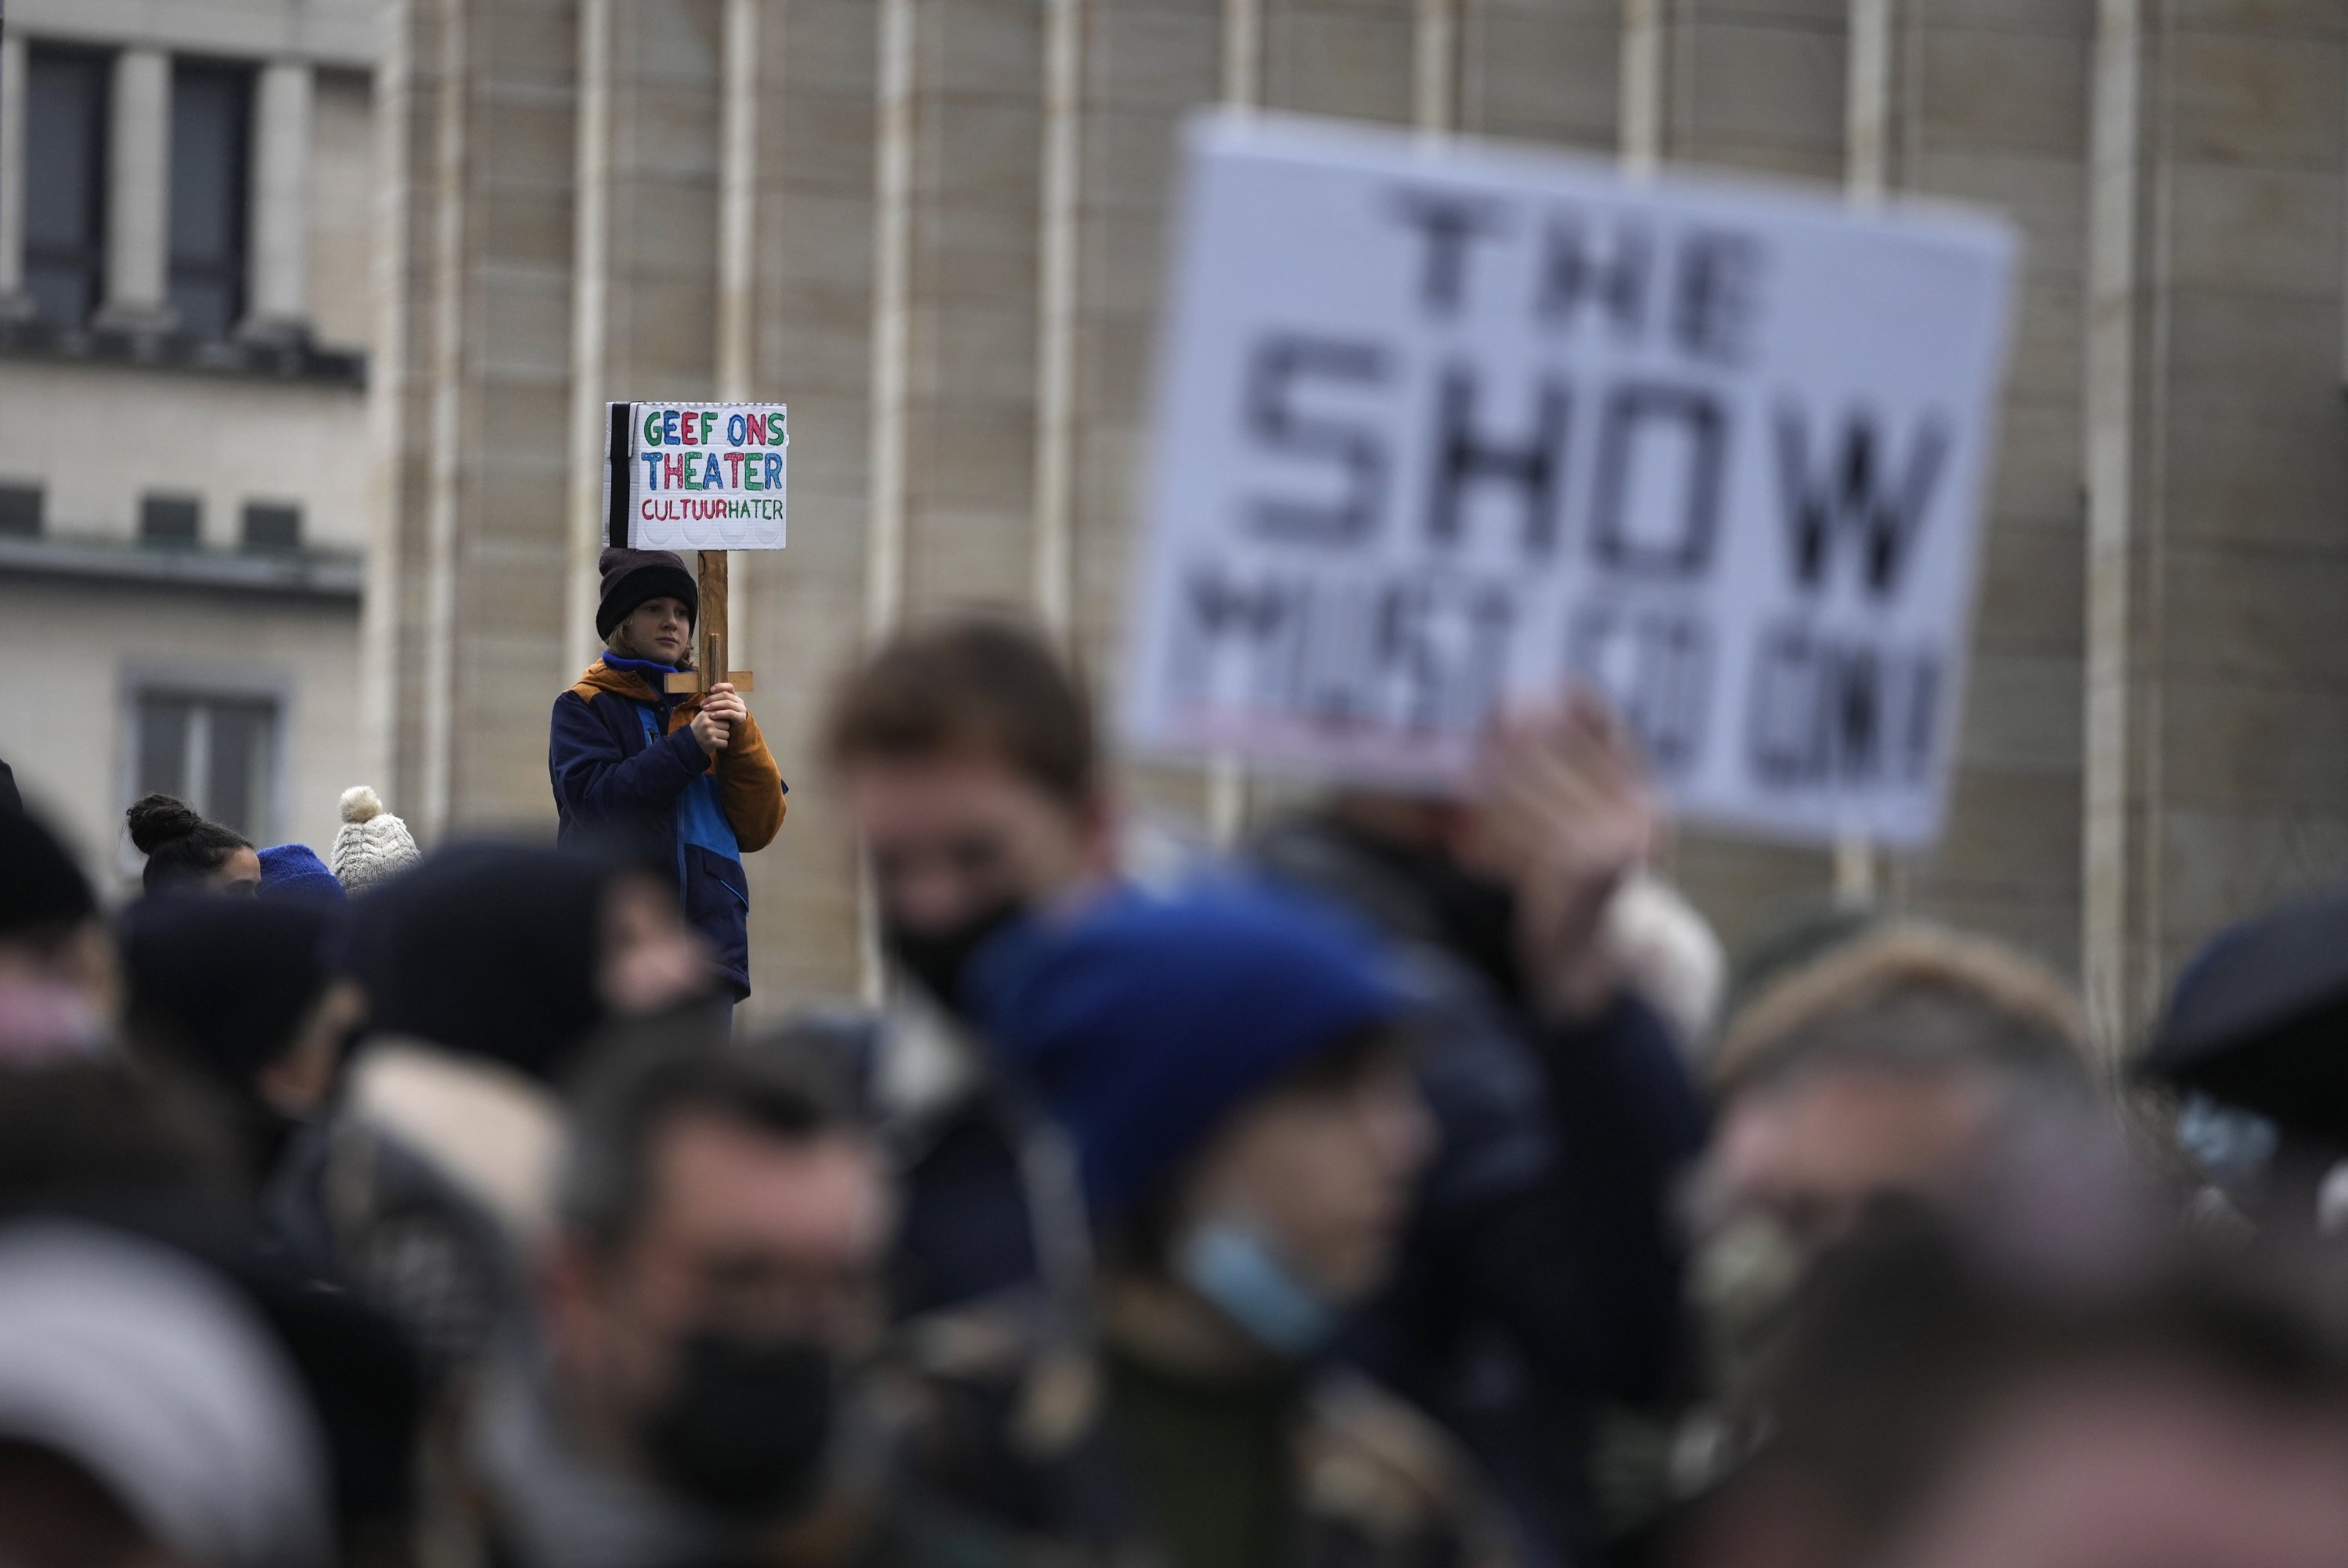 A boy holds a sign that reads "Give us Theatre, culture haters" as he protests with other artists during a demonstration in Brussels on Sunday, Dec. 26, 2021. (AP)